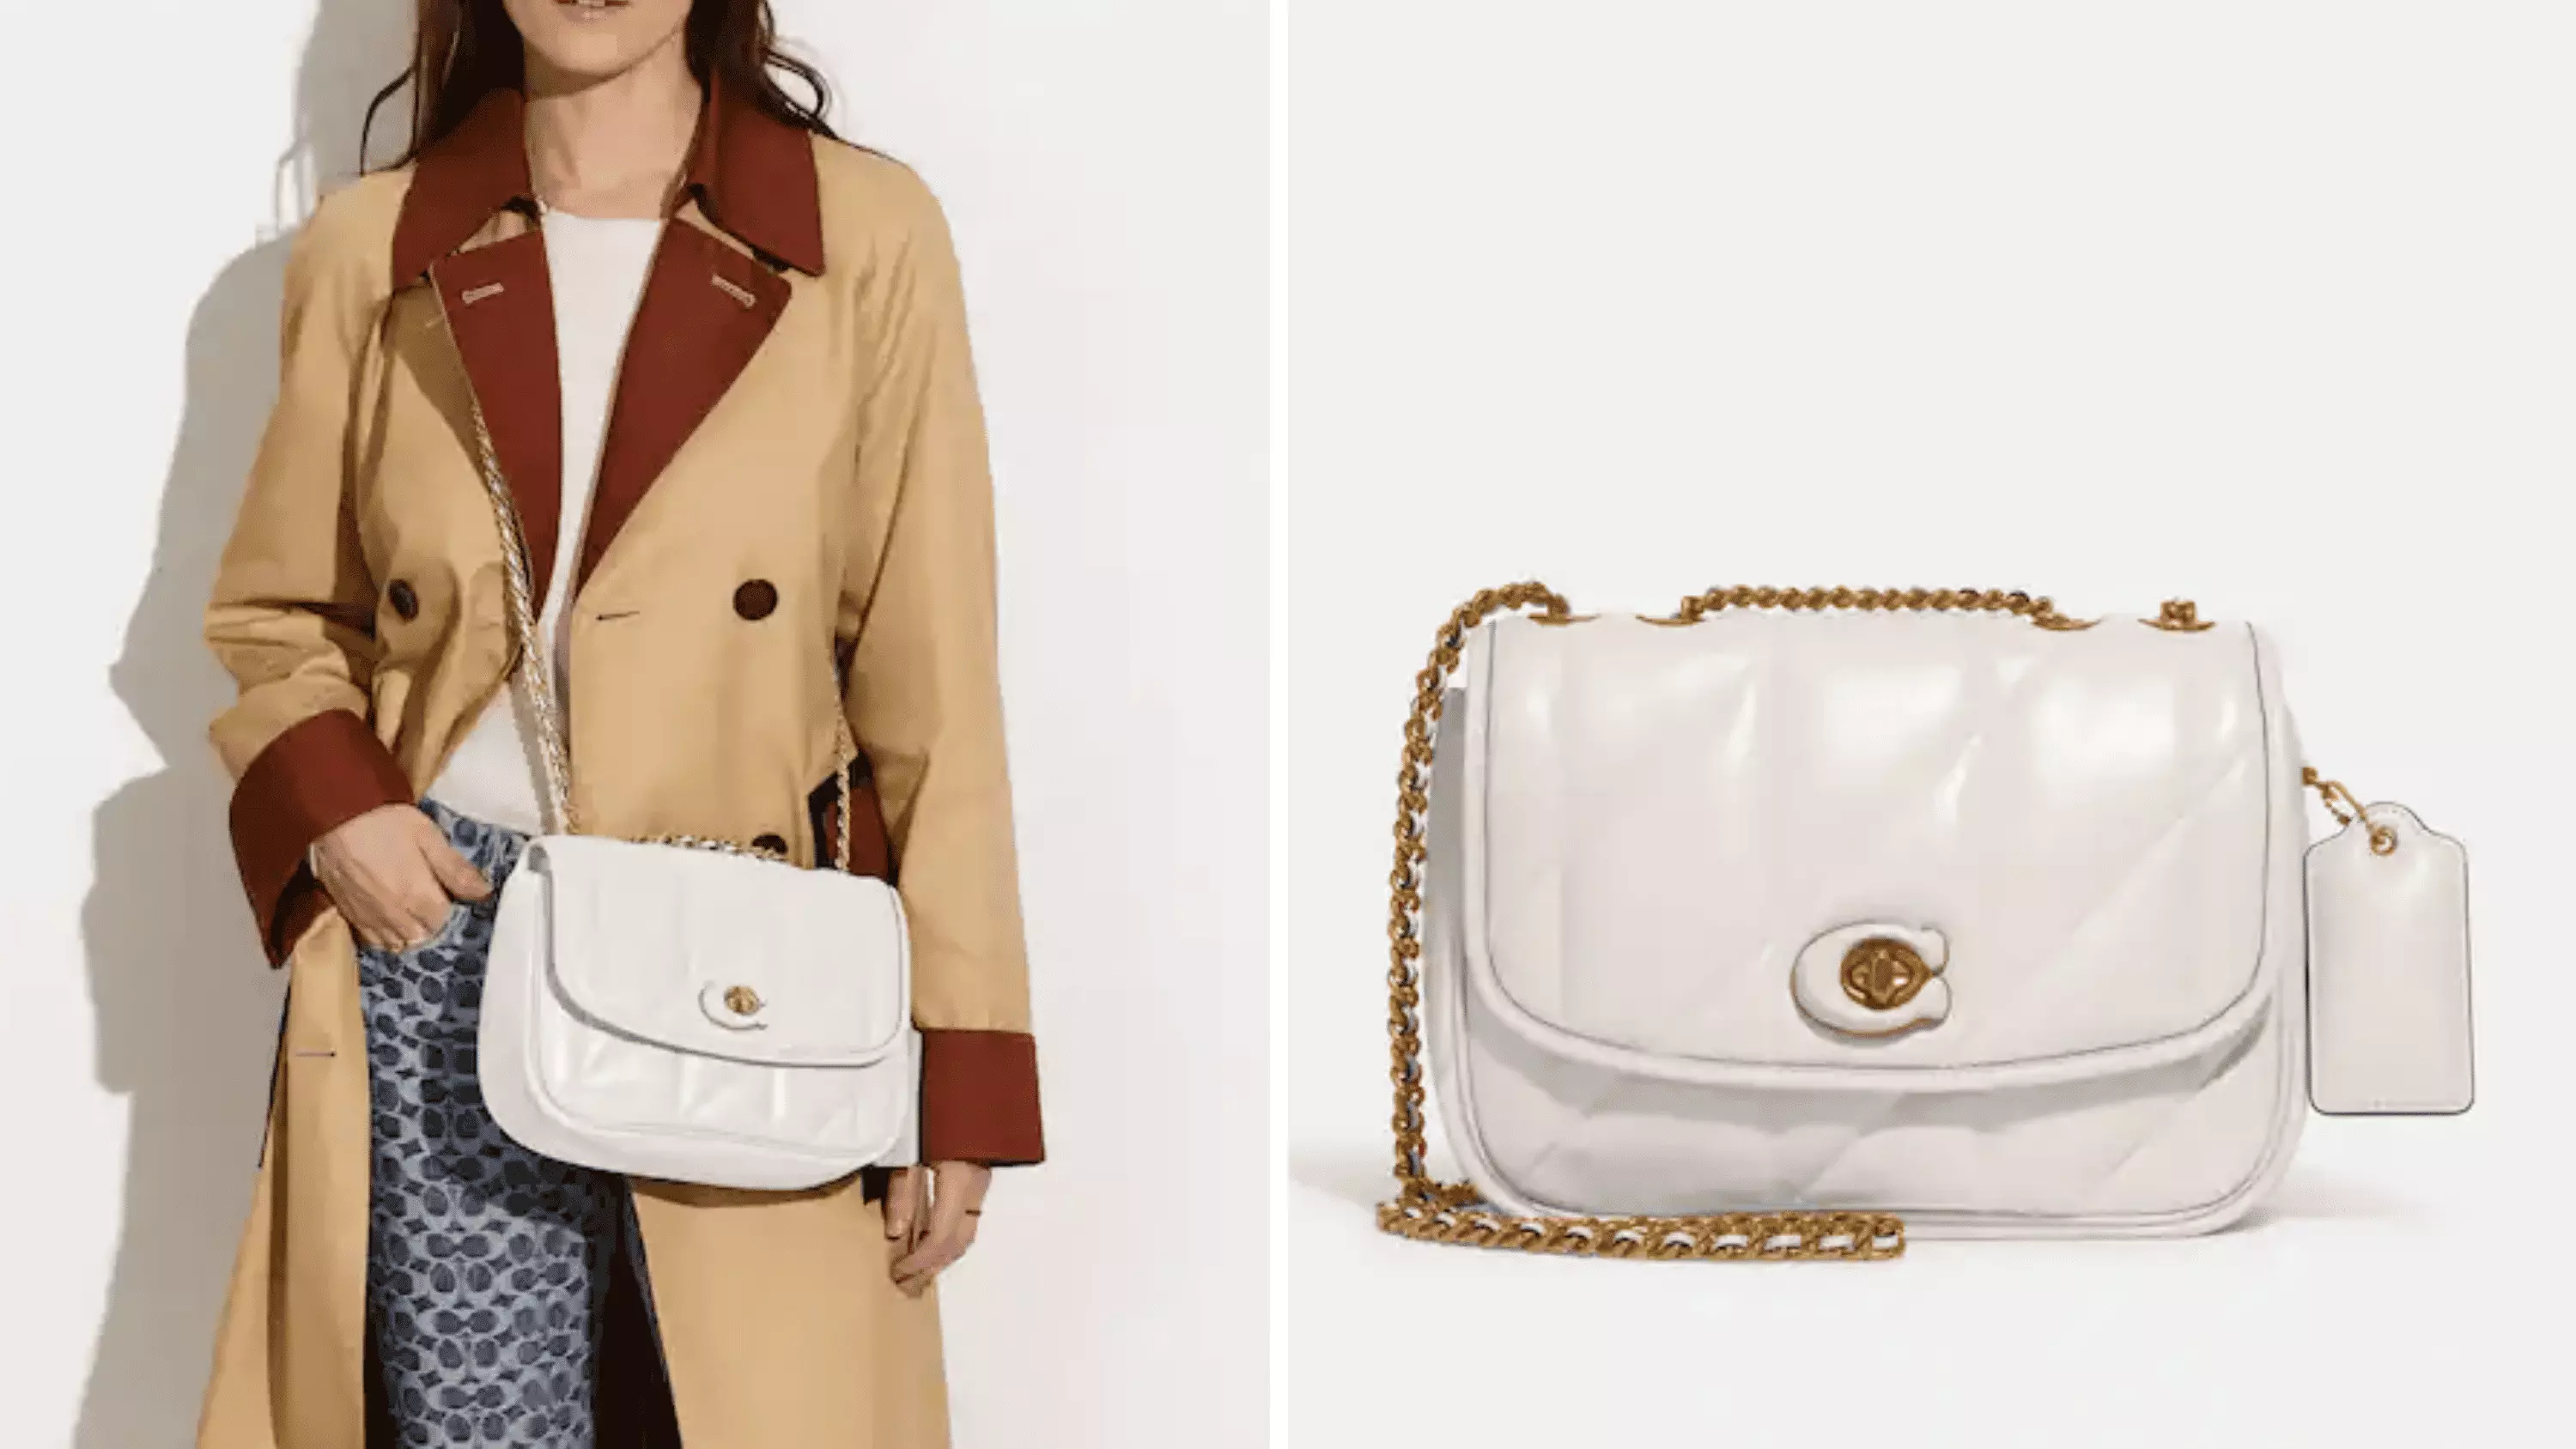 Keep it classic with a quilted Coach bag.